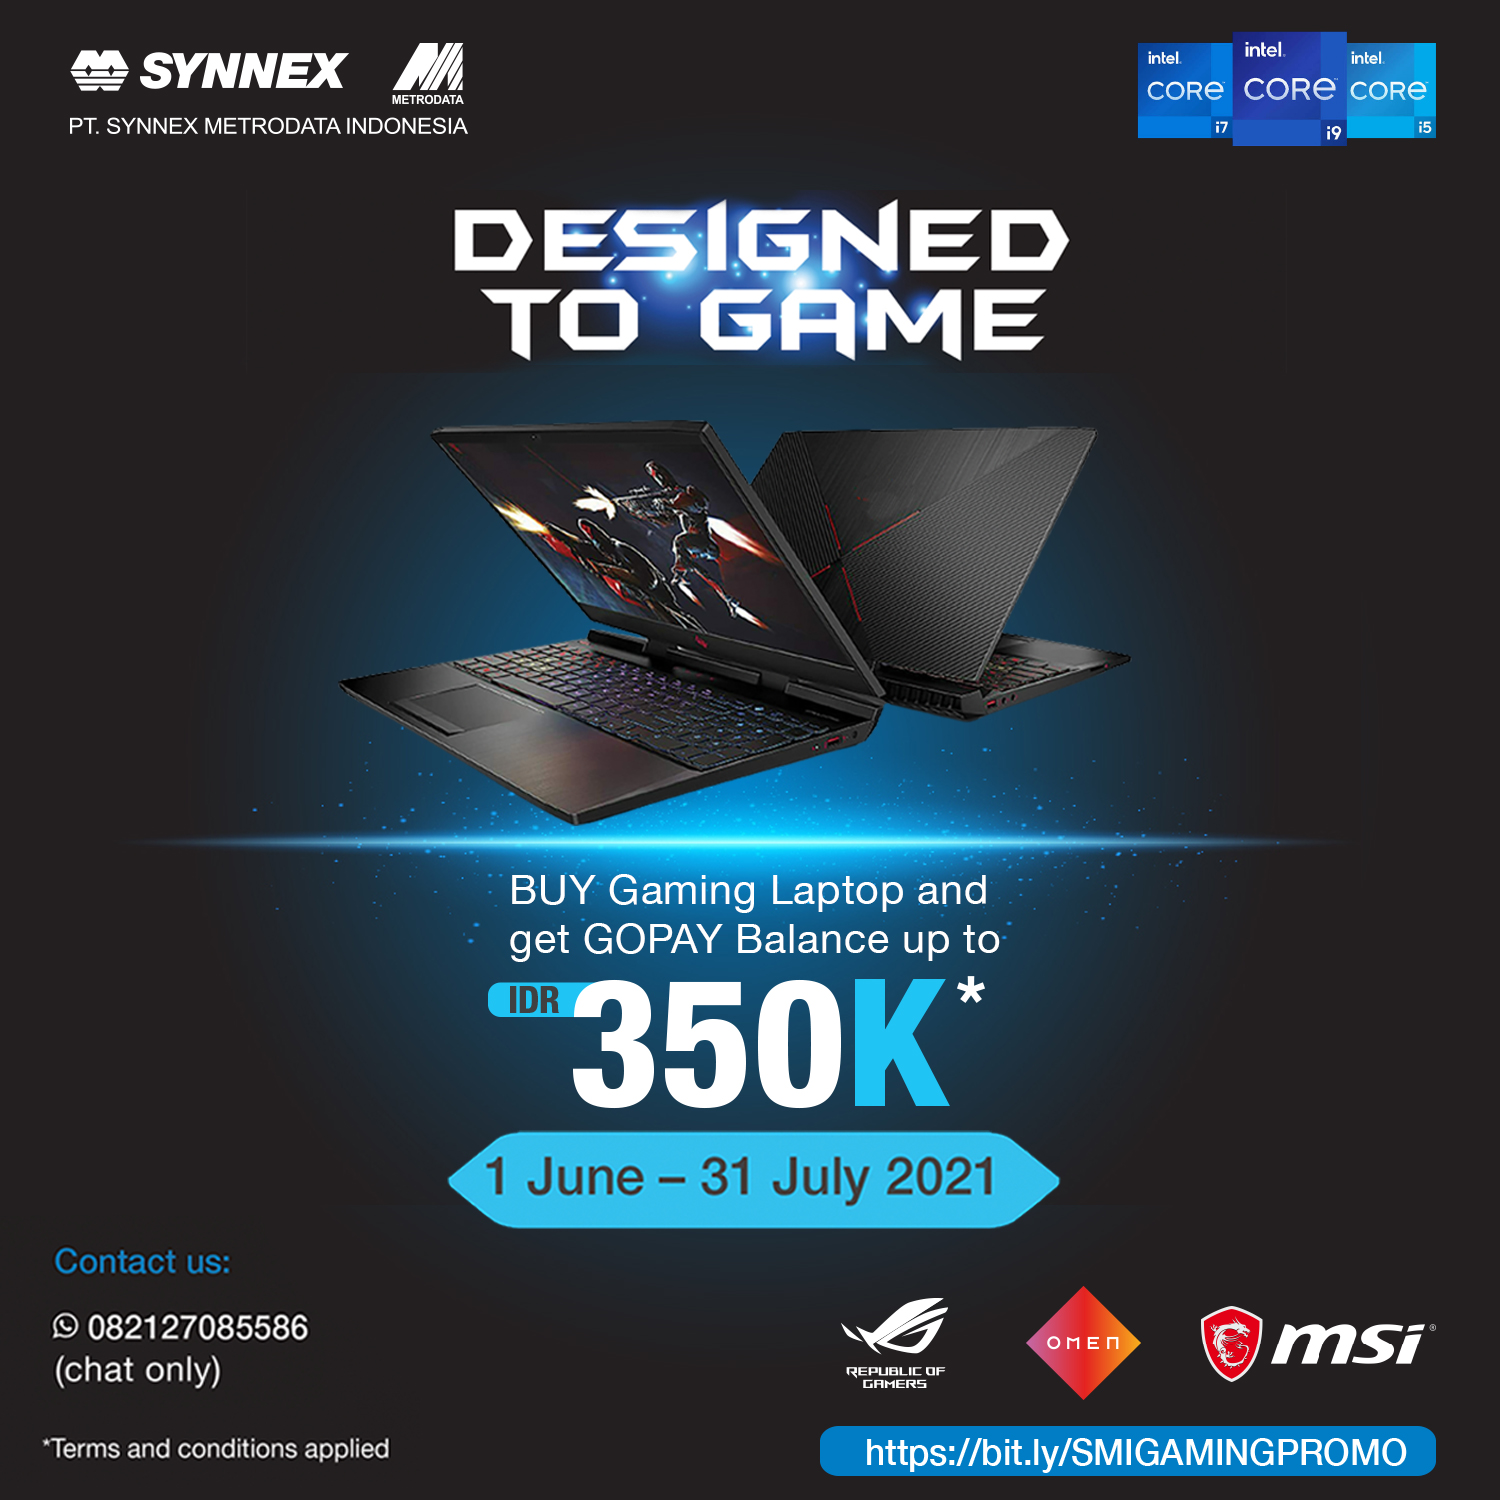 Designed to Game : Buy Gaming Laptop and Get GOPAY Balance up to IDR 350K*